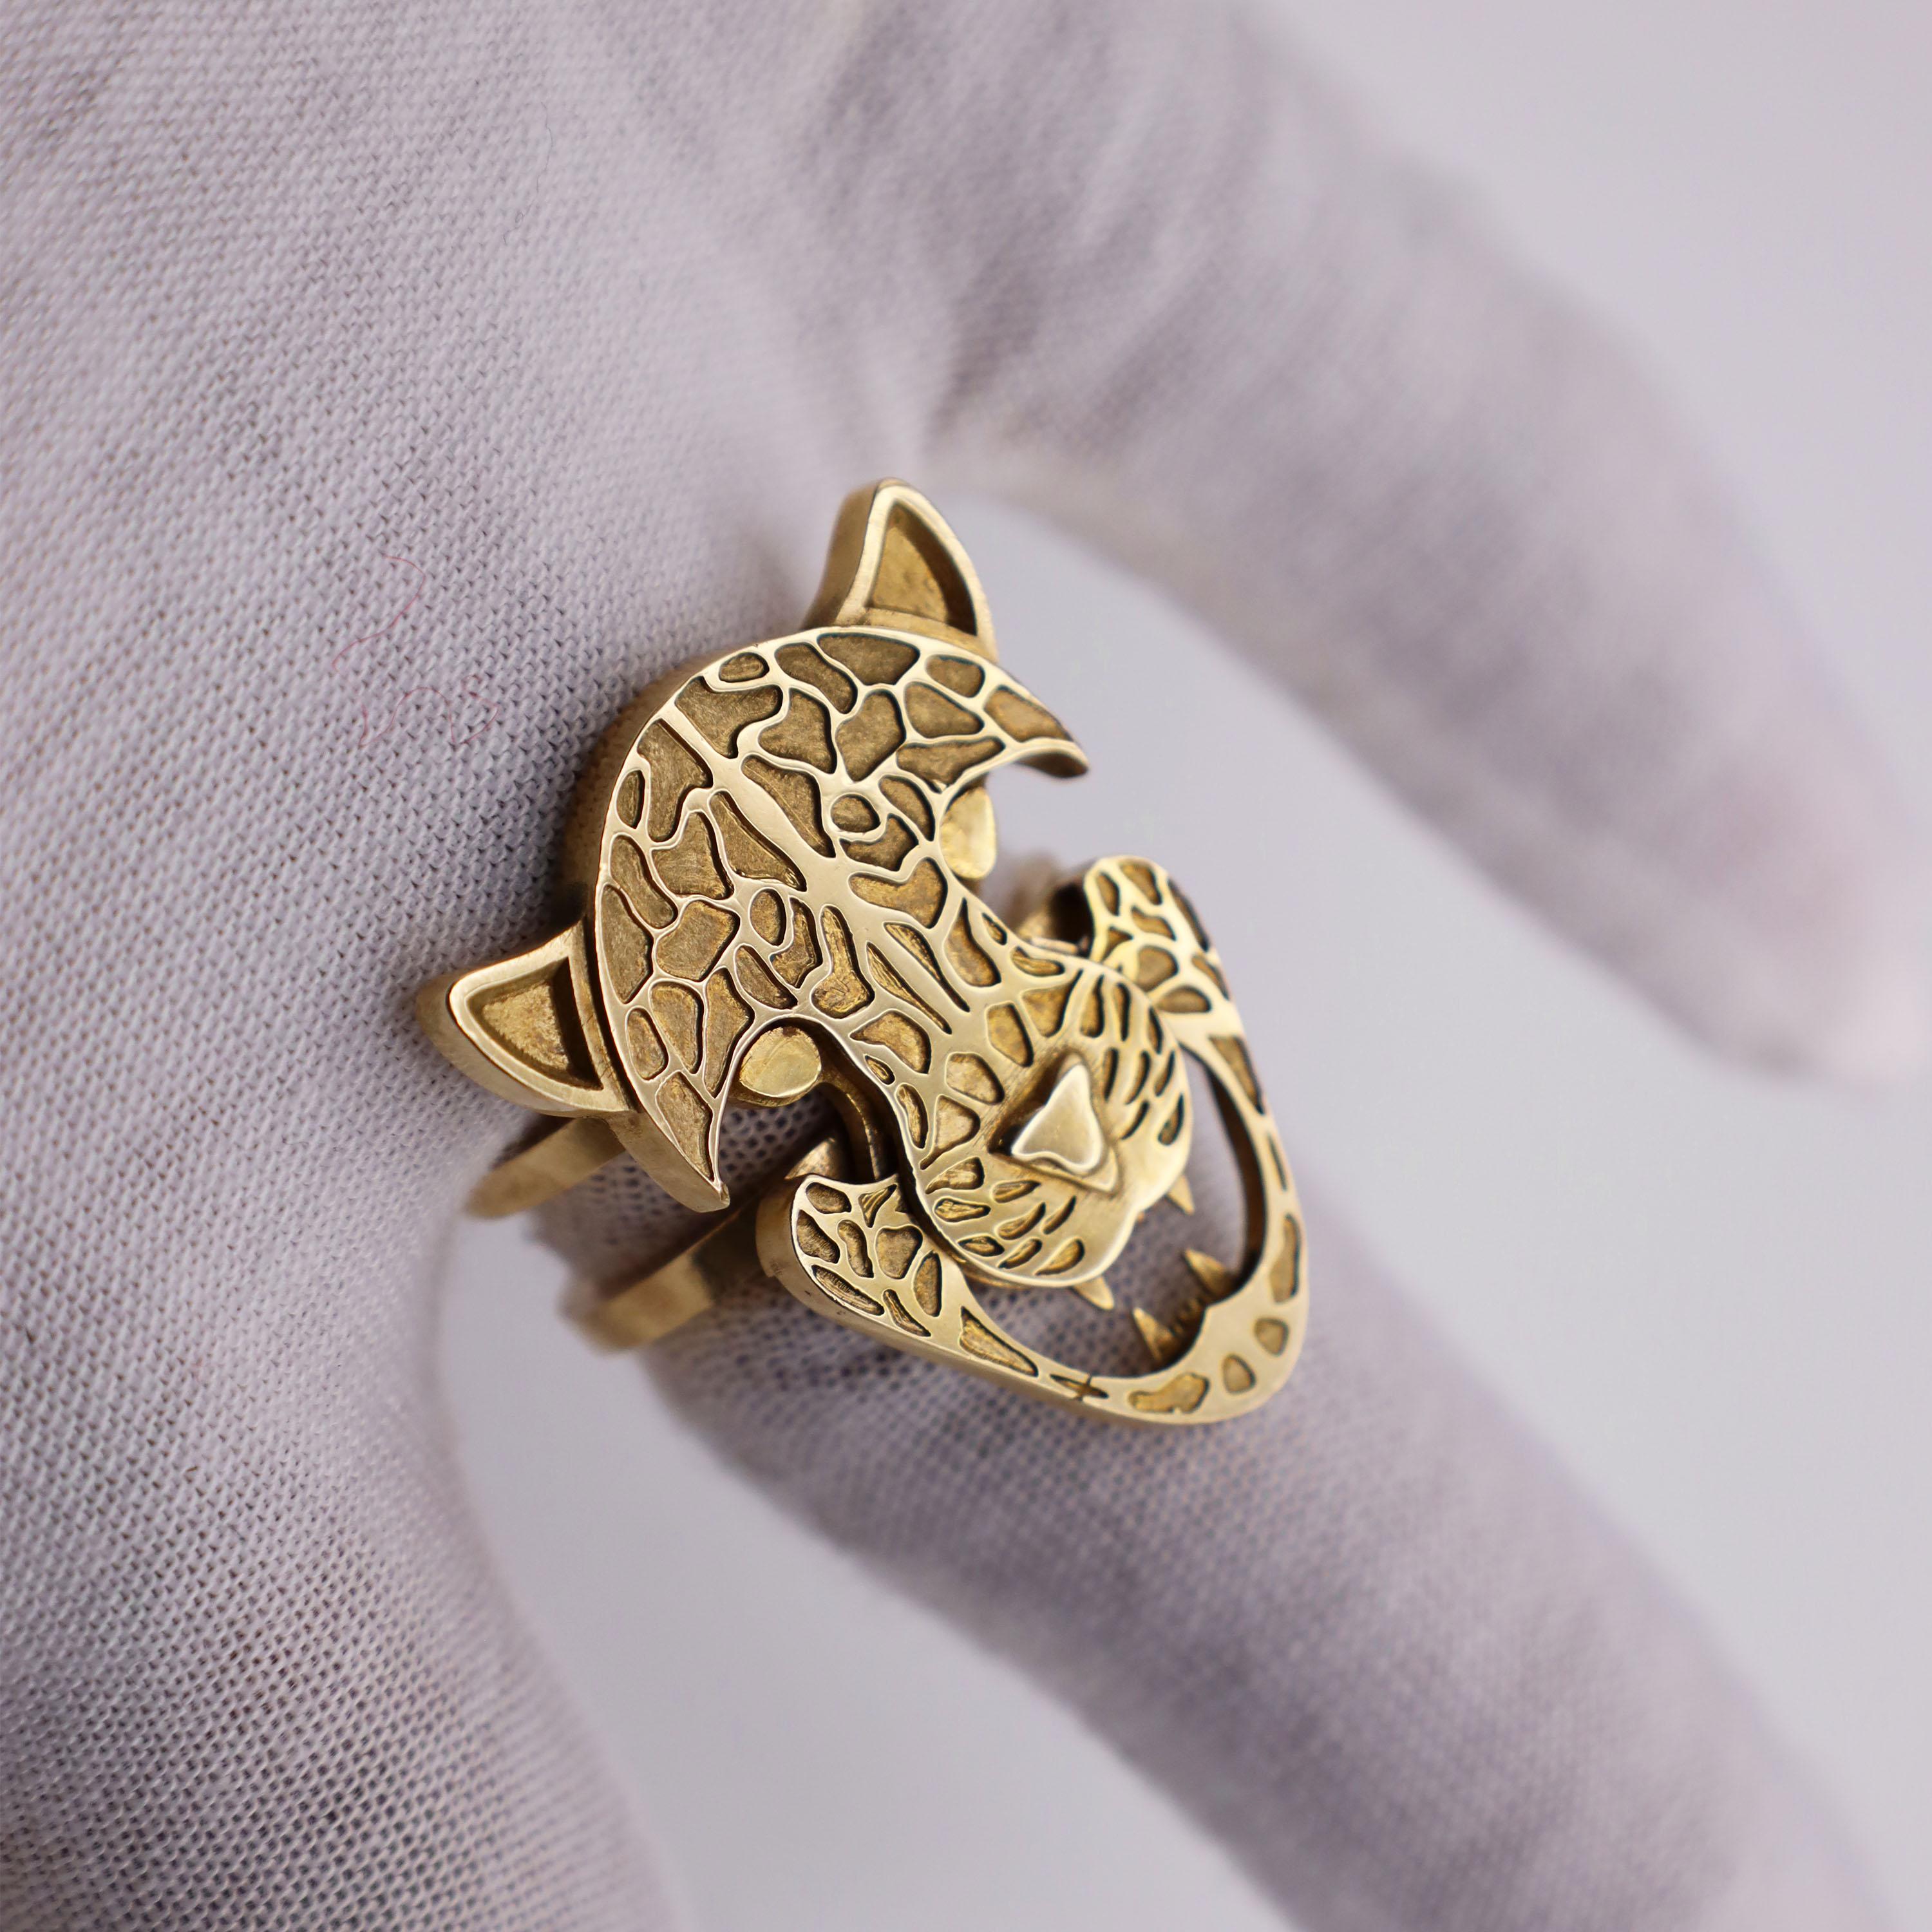 10K Yellow Gold Panther Stack Ring by KRSN Studio For Sale 1